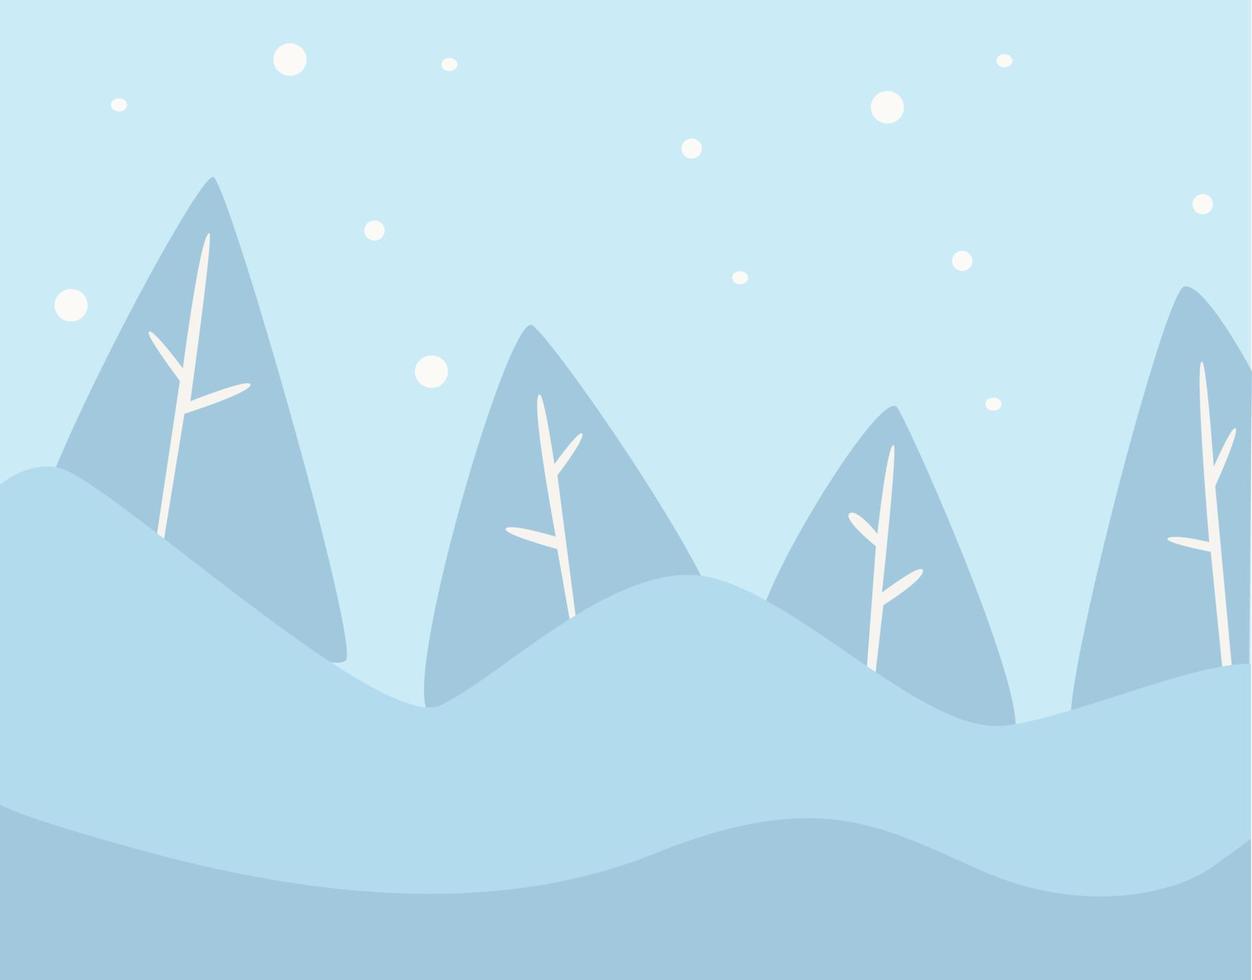 Pine tree winter landscape with snowy hills vector